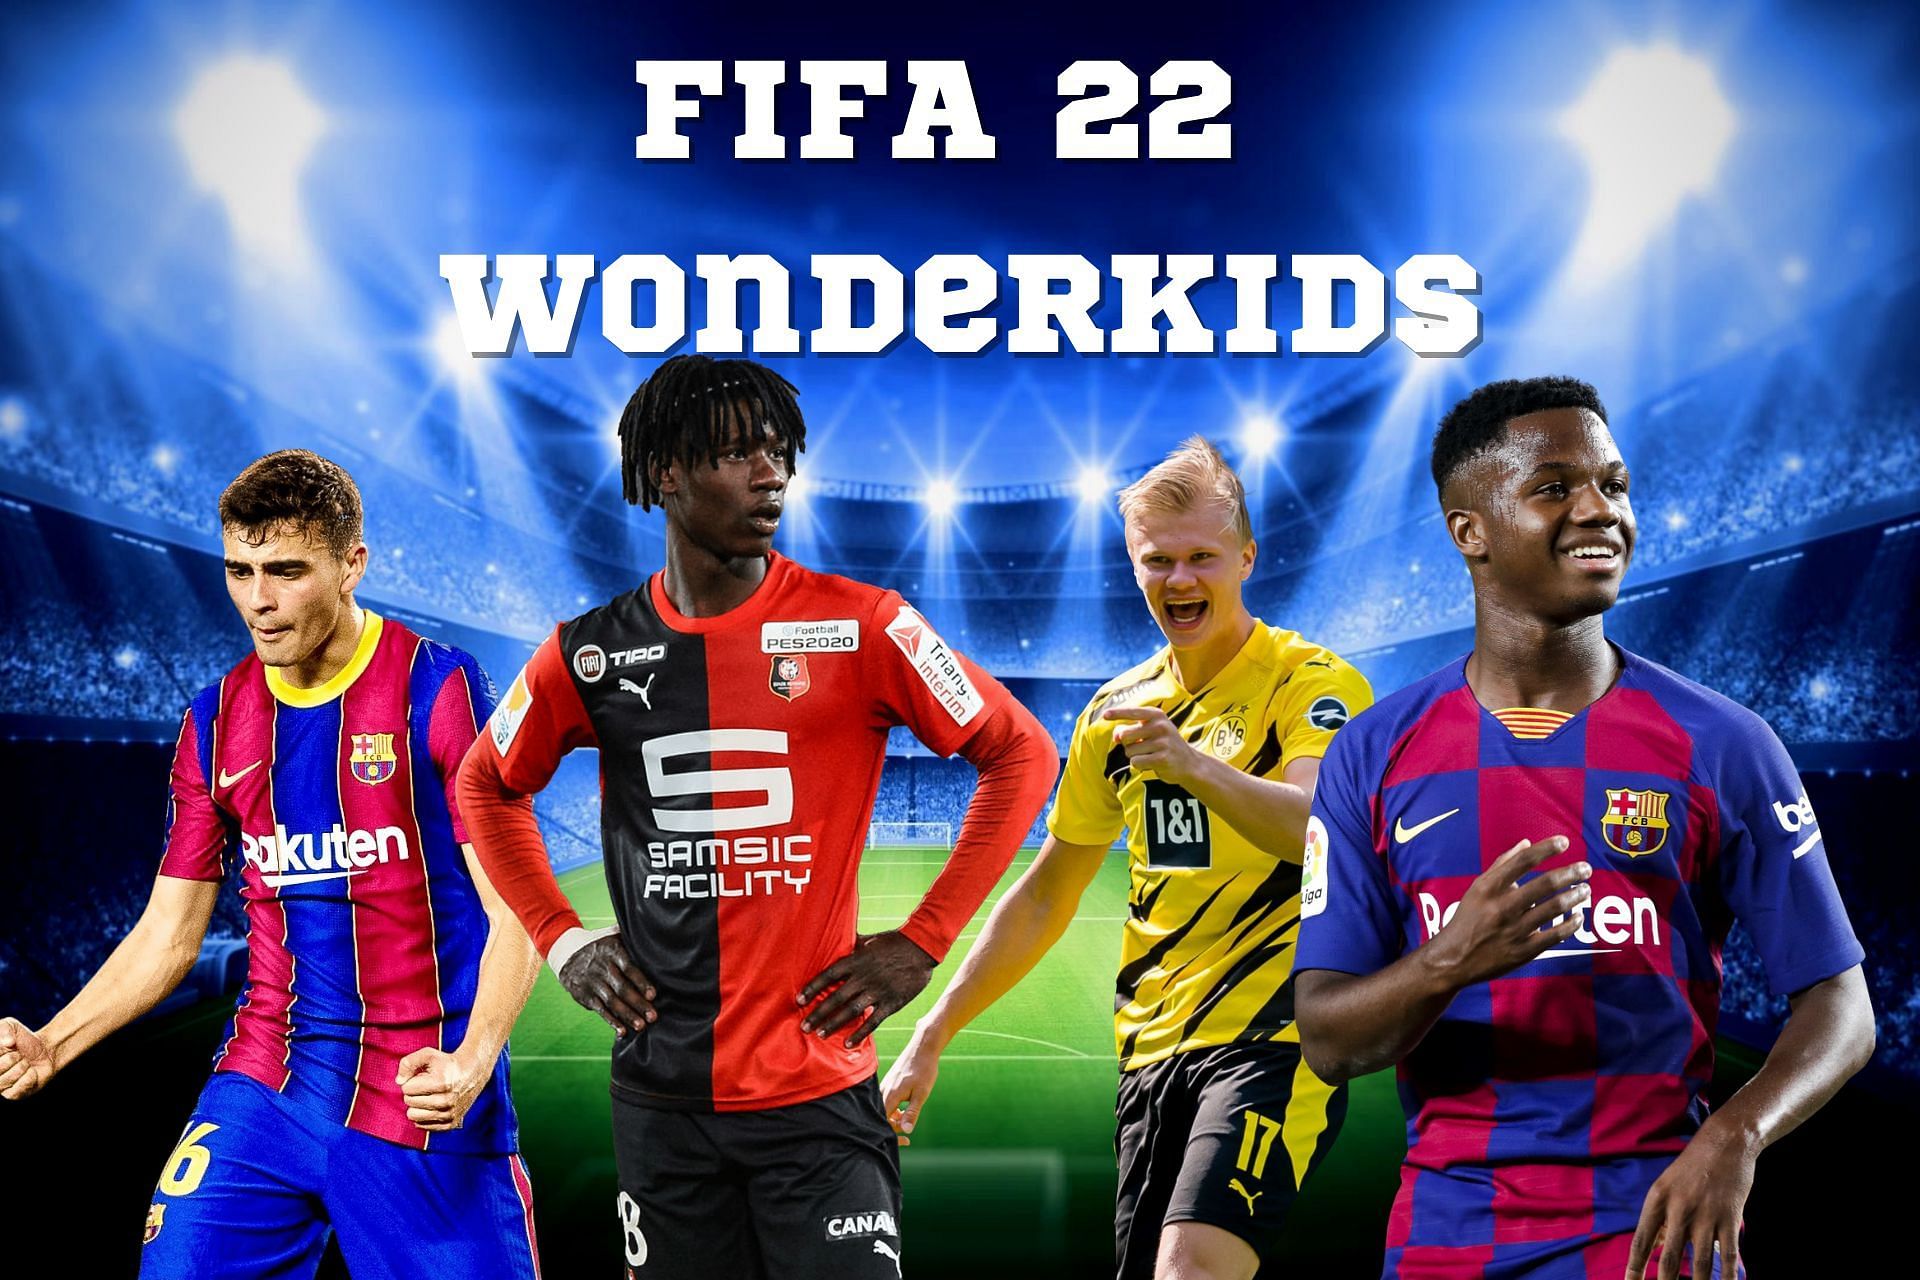 5 teams with the best wonderkids in FIFA 22